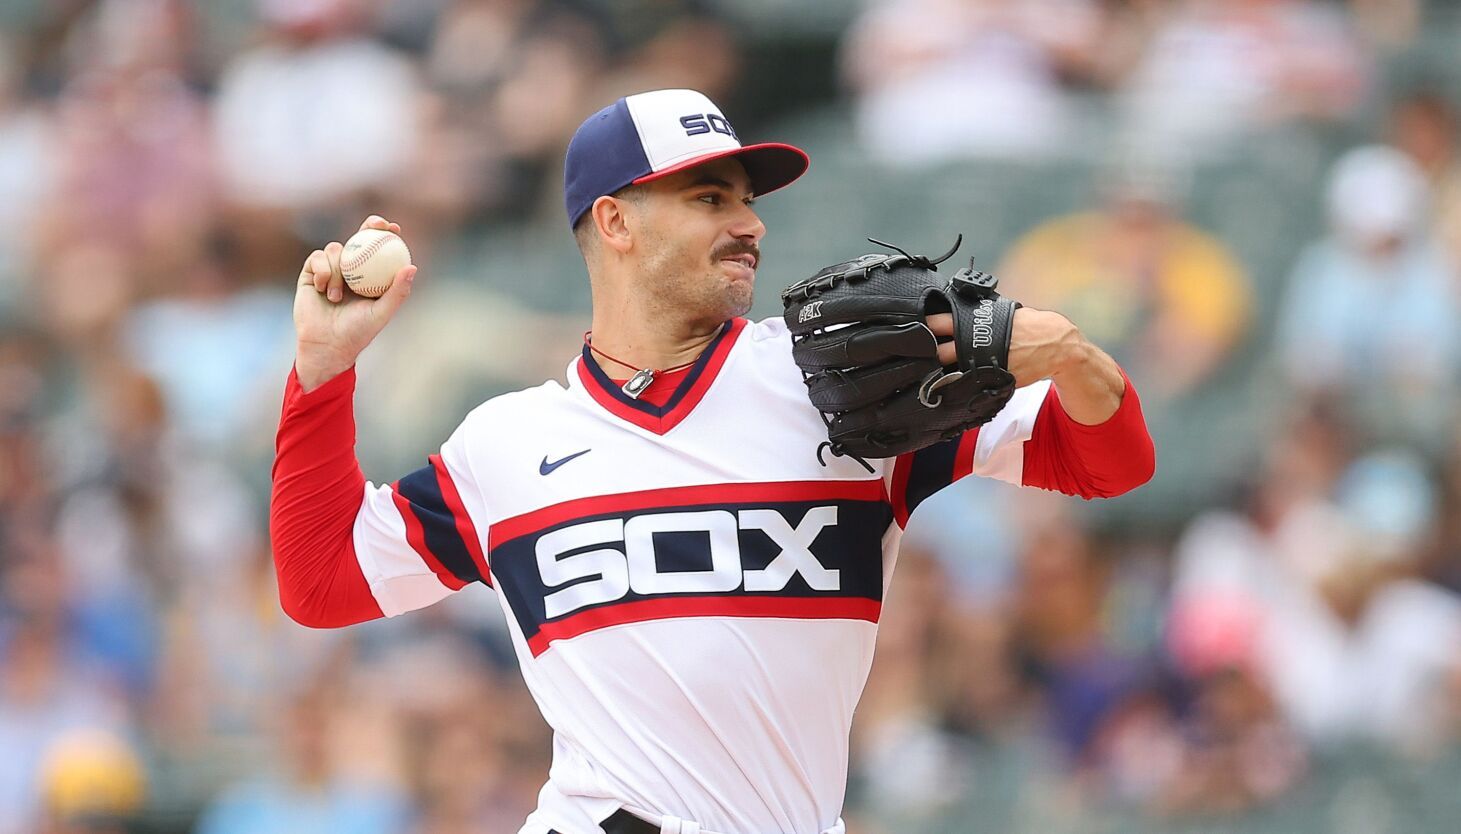 Chicago White Sox pitcher Dylan Cease should be an All-Star